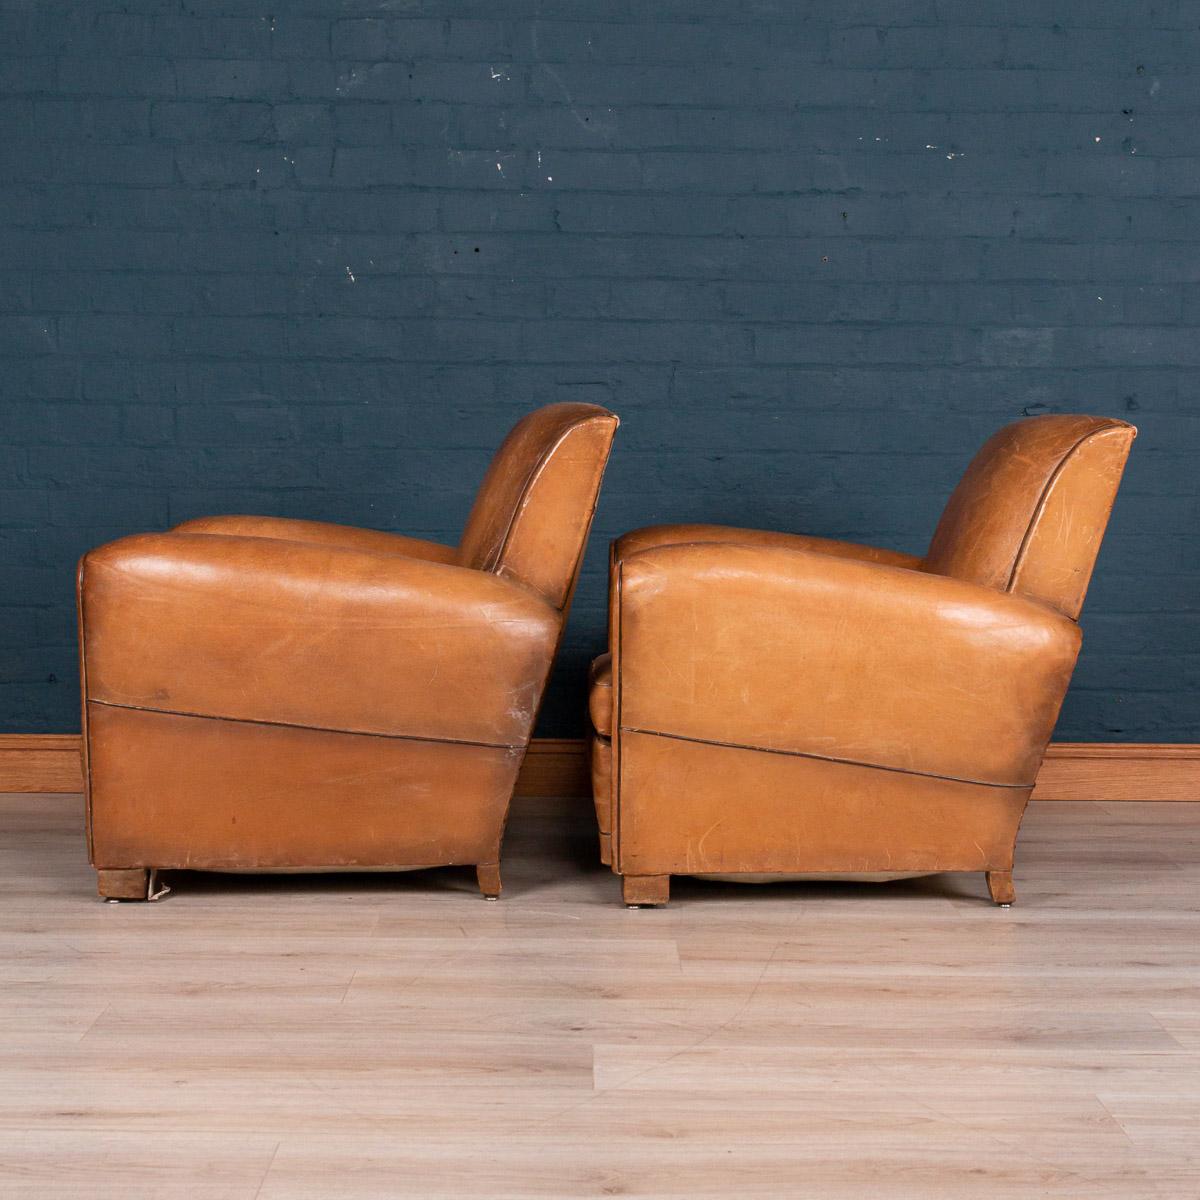 French Pair of 20th Century Leather Club Chairs, circa 1930